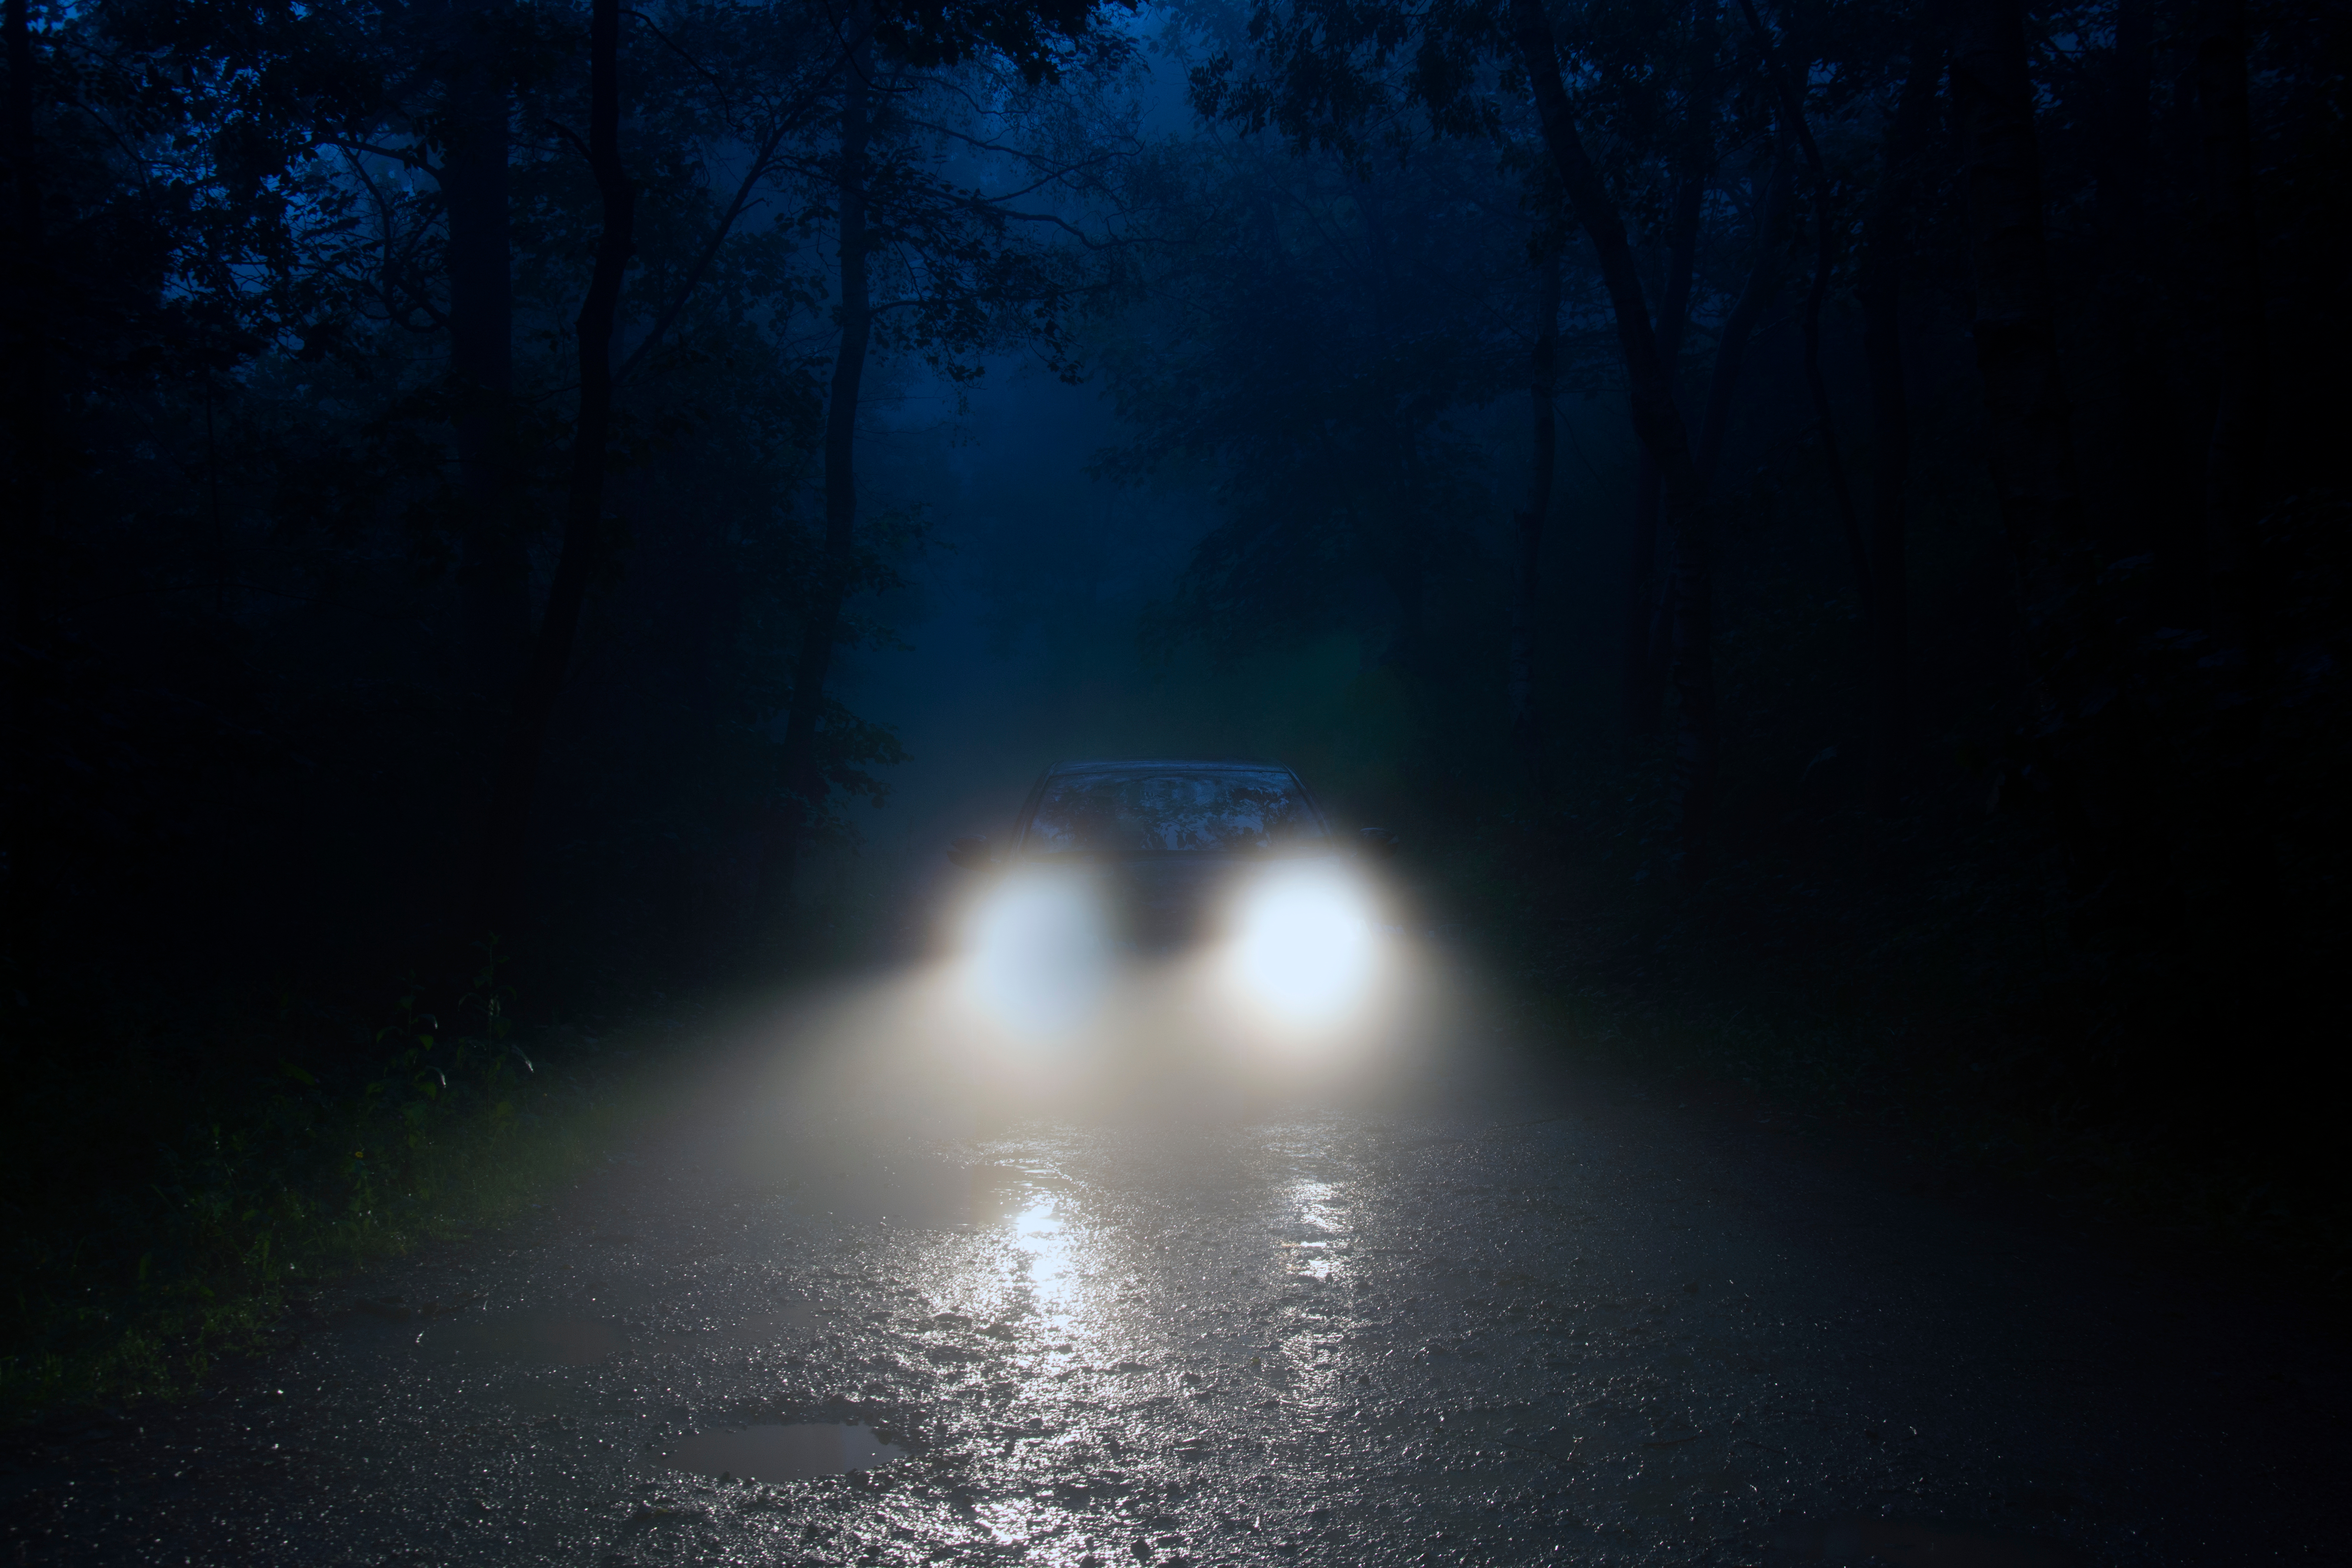 A spooky forest road with car headlights shining through the fog | Source: Shutterstock.com